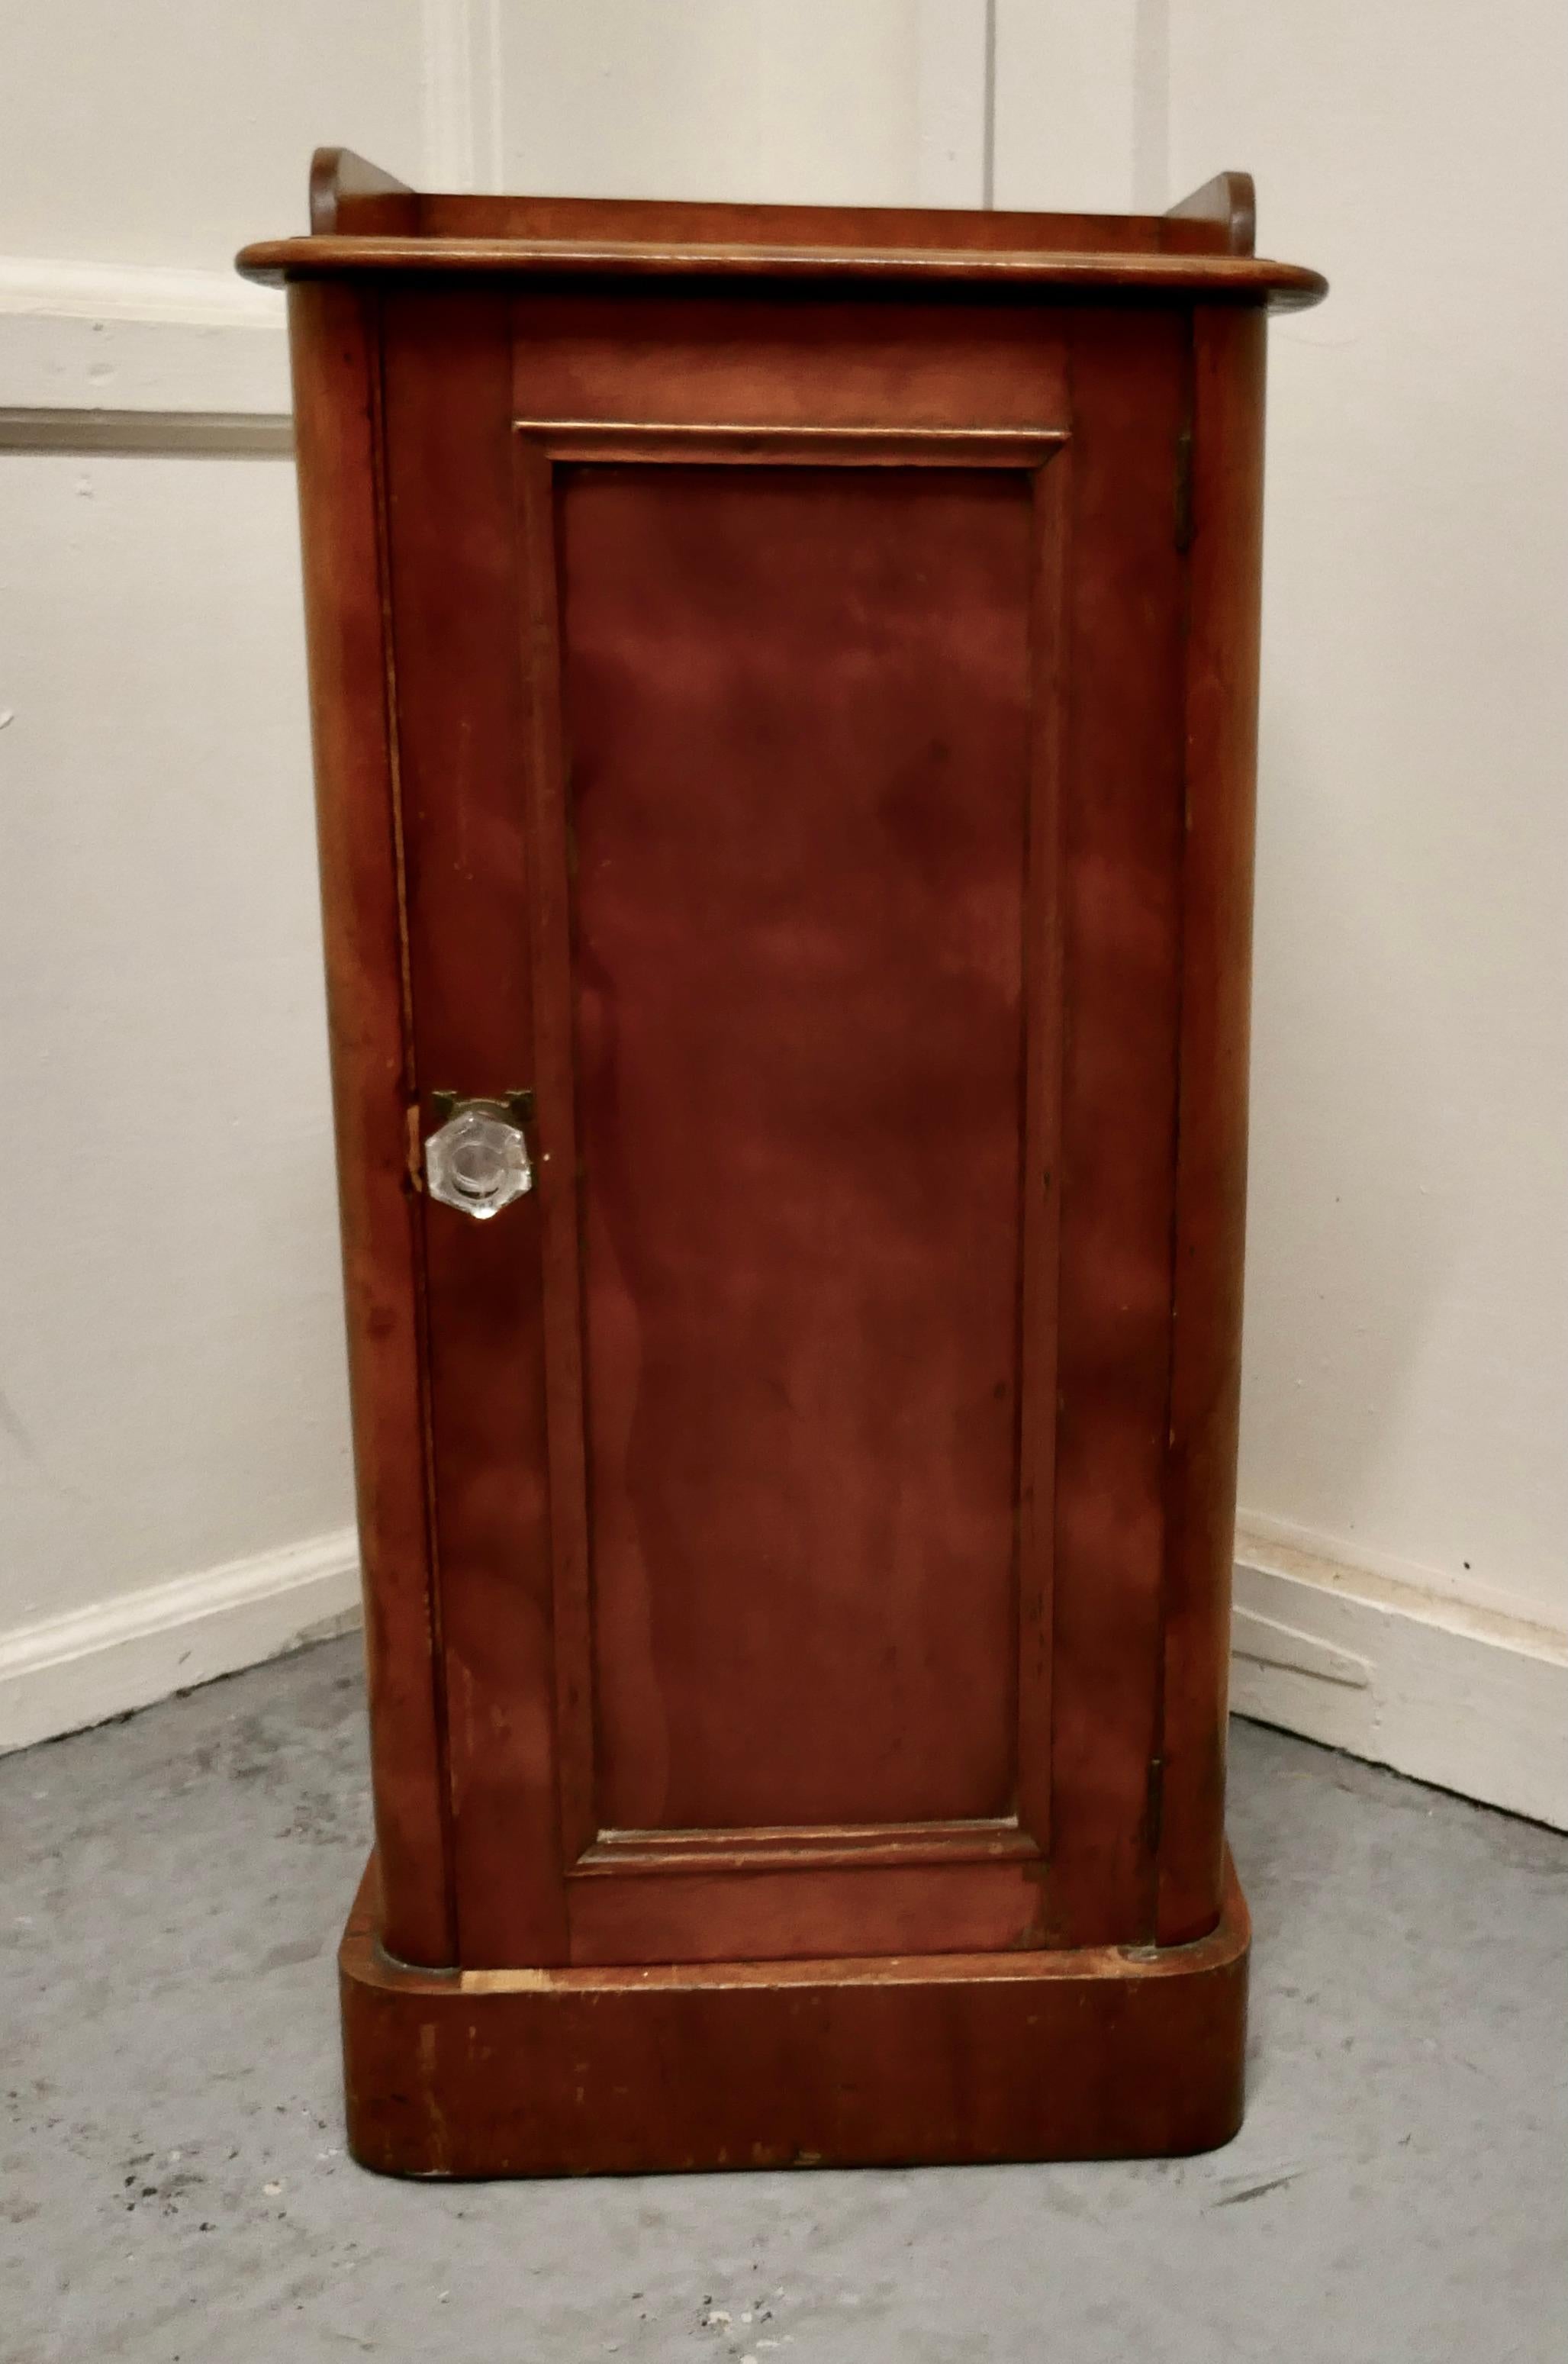 Victorian birch bedside cupboard.

This is a charming and attractive piece, it is made in flame Birch with a gallery around the top, the door is panelled and there is a shelf inside.
The cabinet is in good condition, it is 31.5” tall, 16” wide